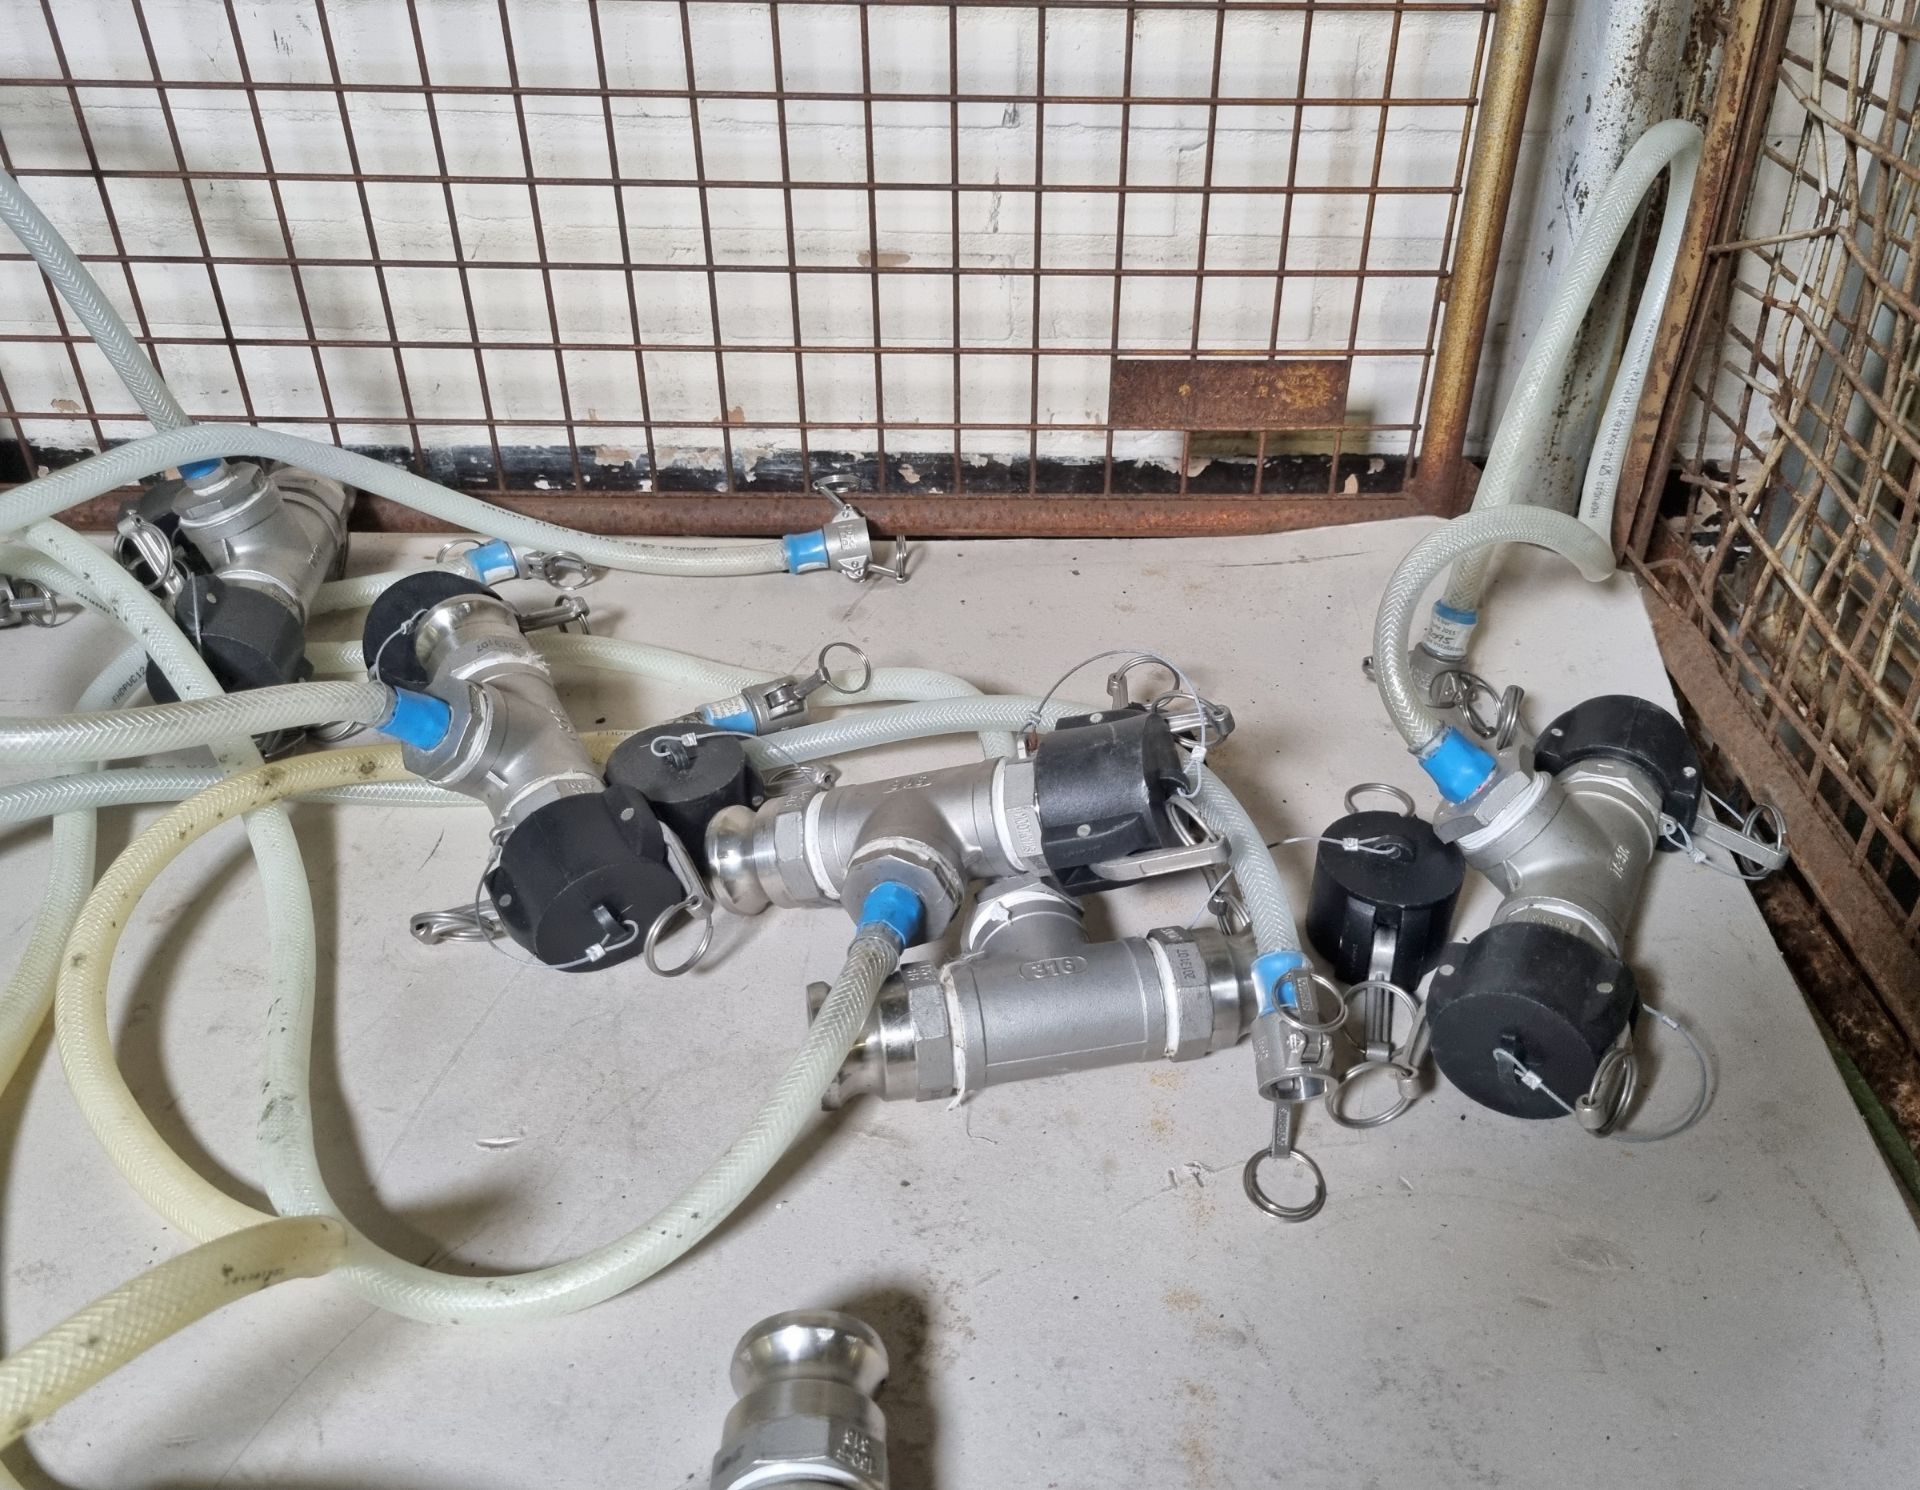 8x Stainless steel piping 11/2-150 with Snaplock connectors 150-F 316 with 1M flexible hose - Image 3 of 5